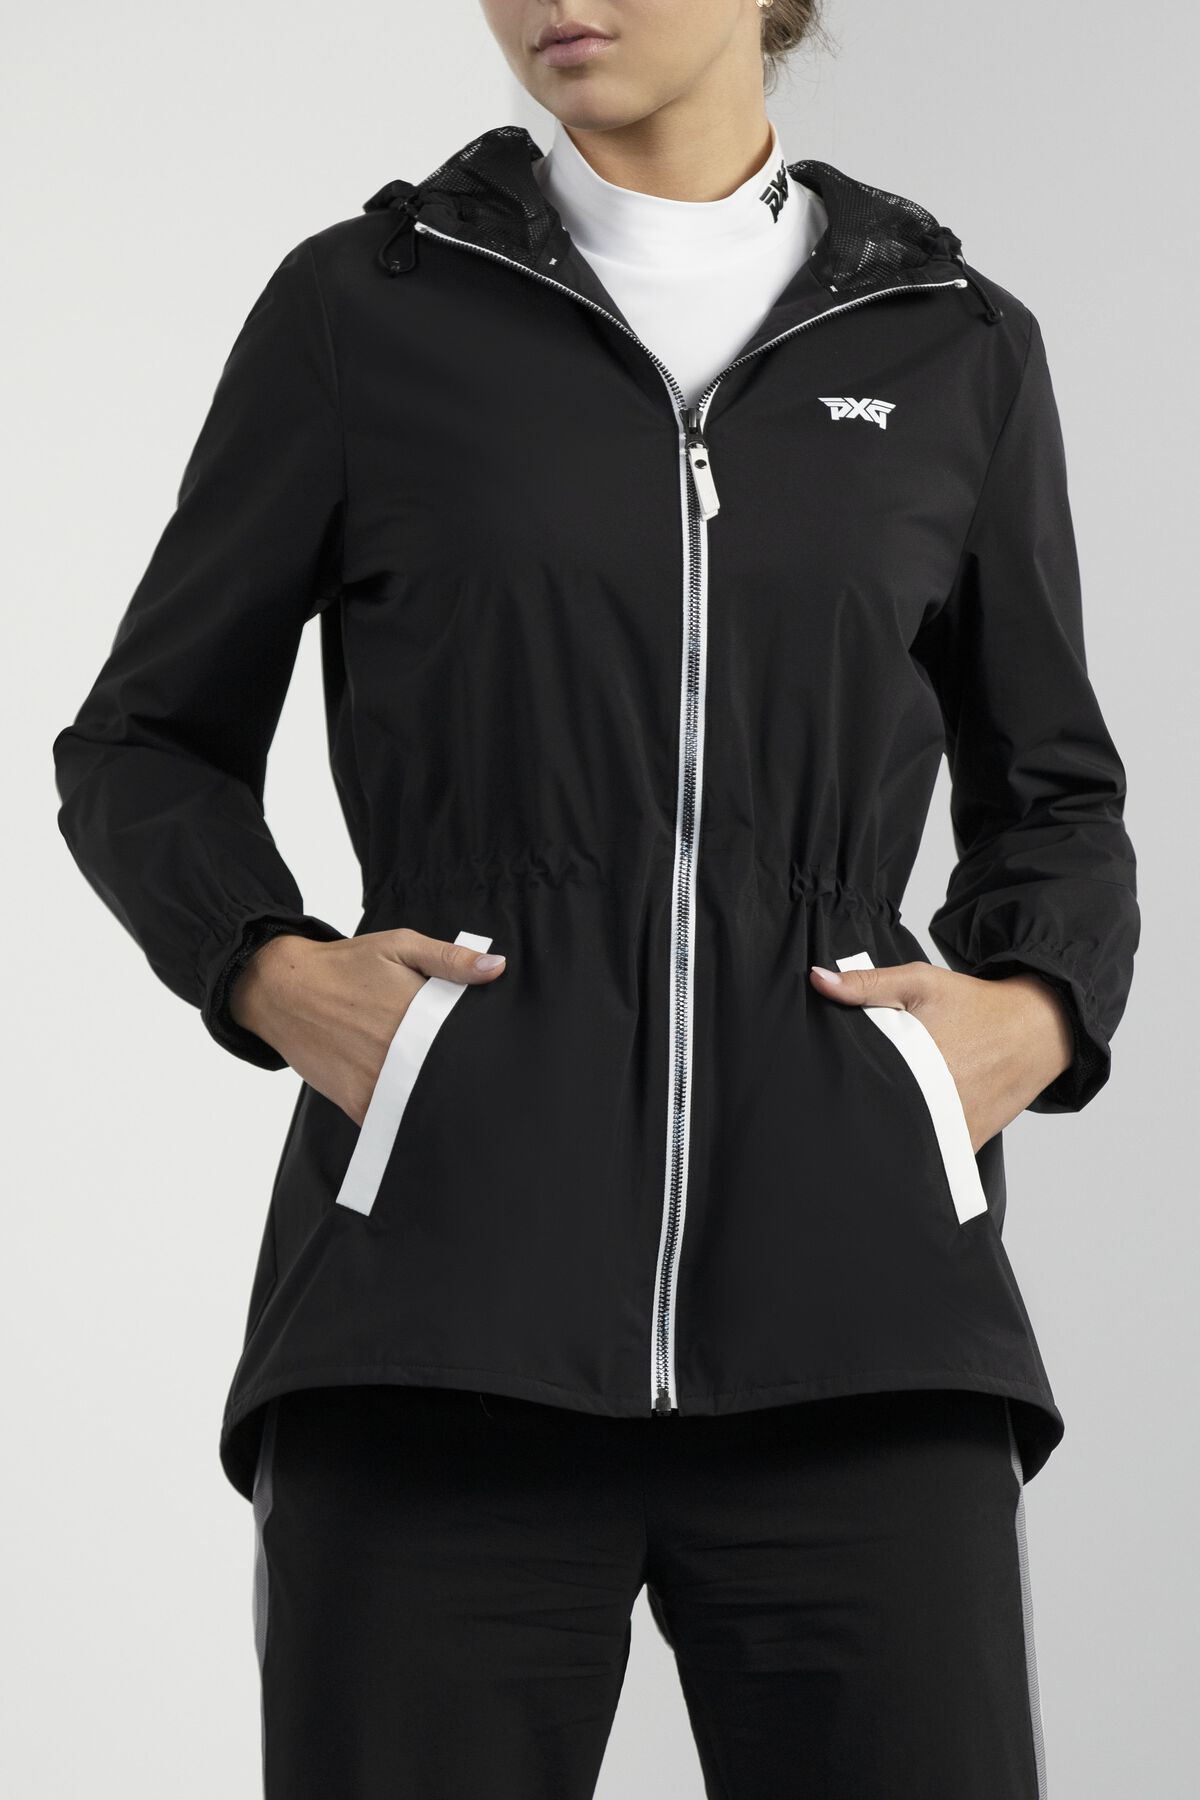 Women's ?Full Zip Hooded Jacket  Shop the Highest Quality Golf Apparel,  Gear, Accessories and Golf Clubs at PXG